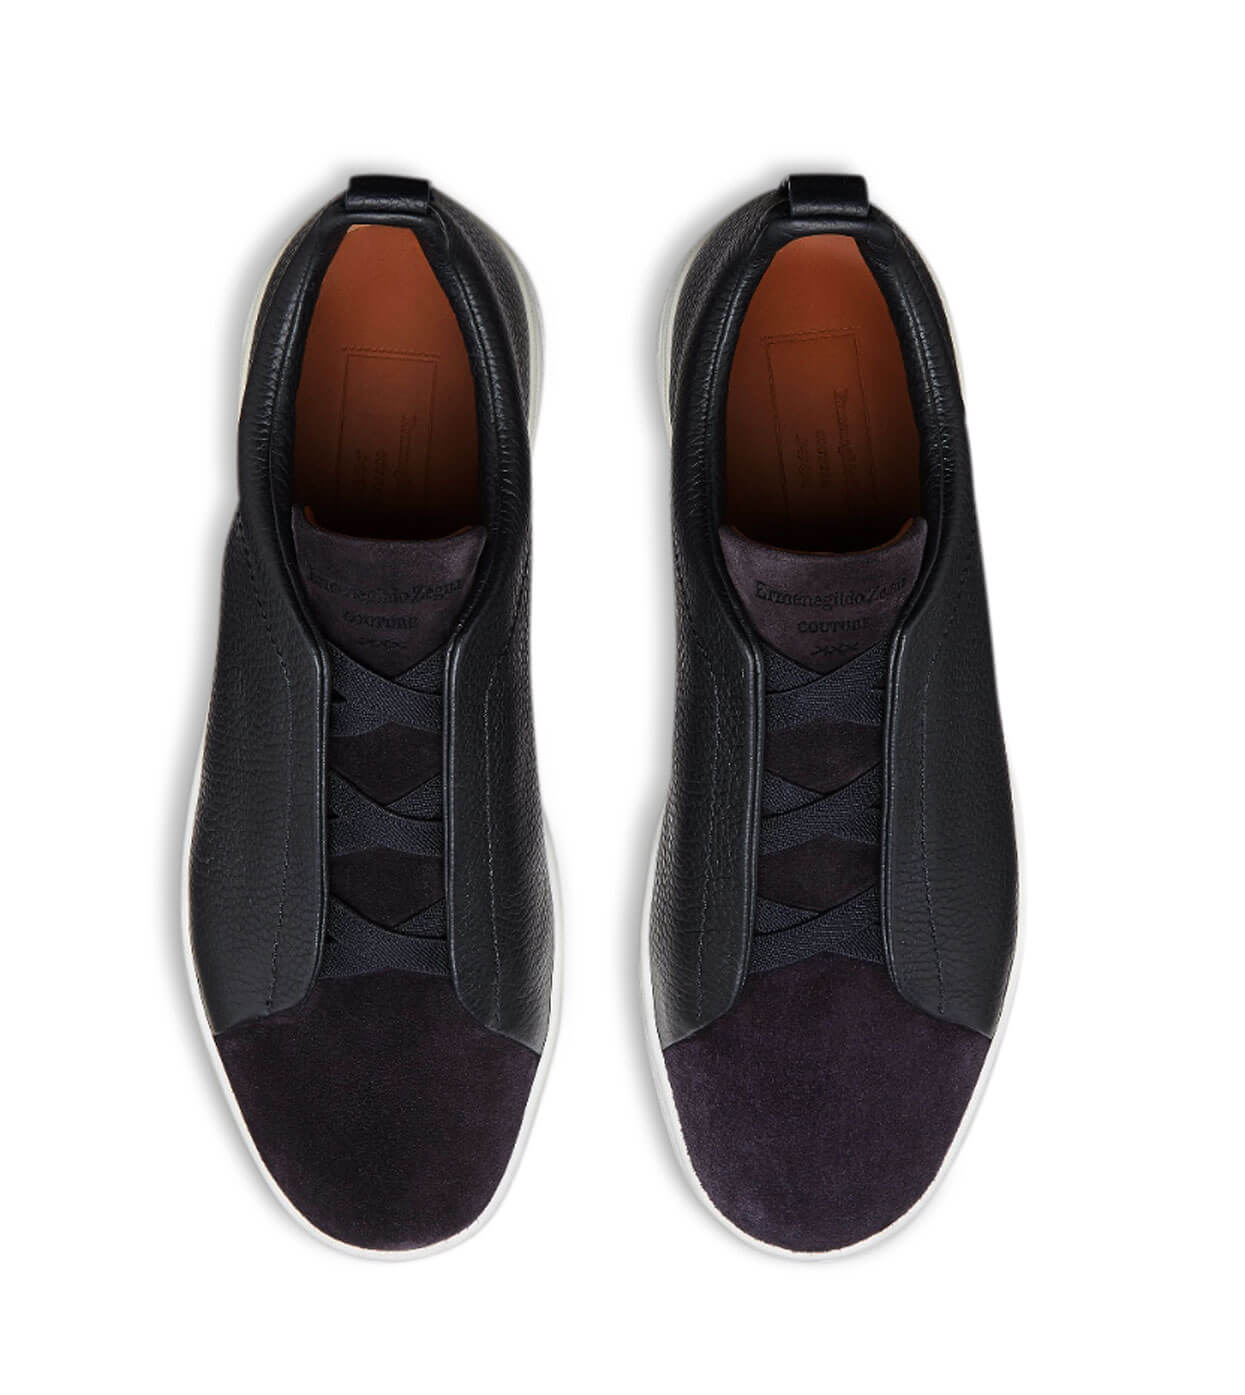 ZEGNA Leather/Suede Low Top Sneaker US Sizing